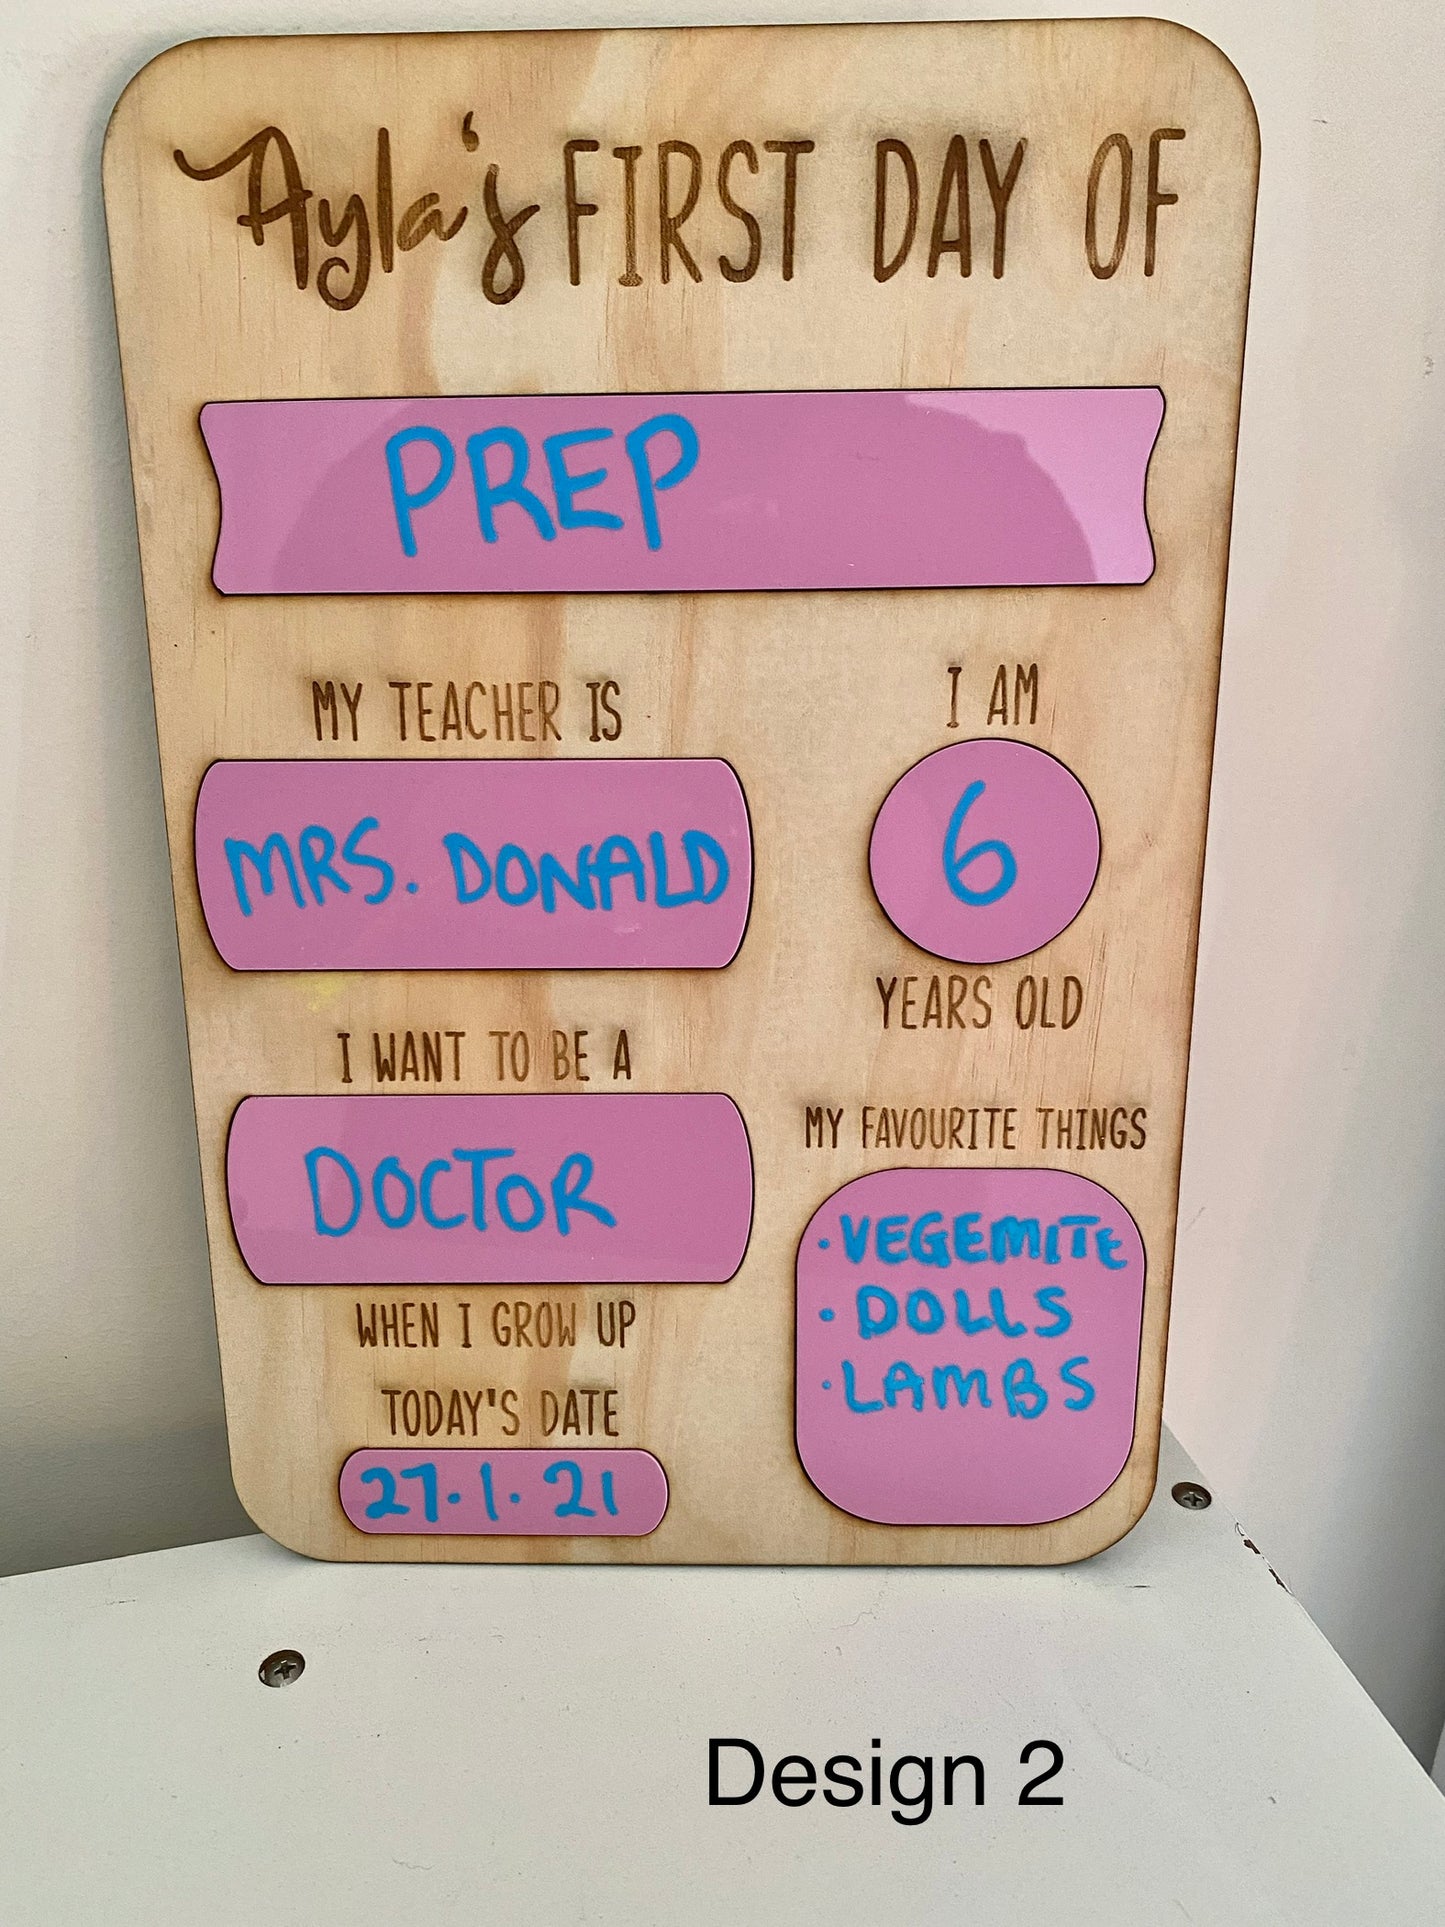 First day boards